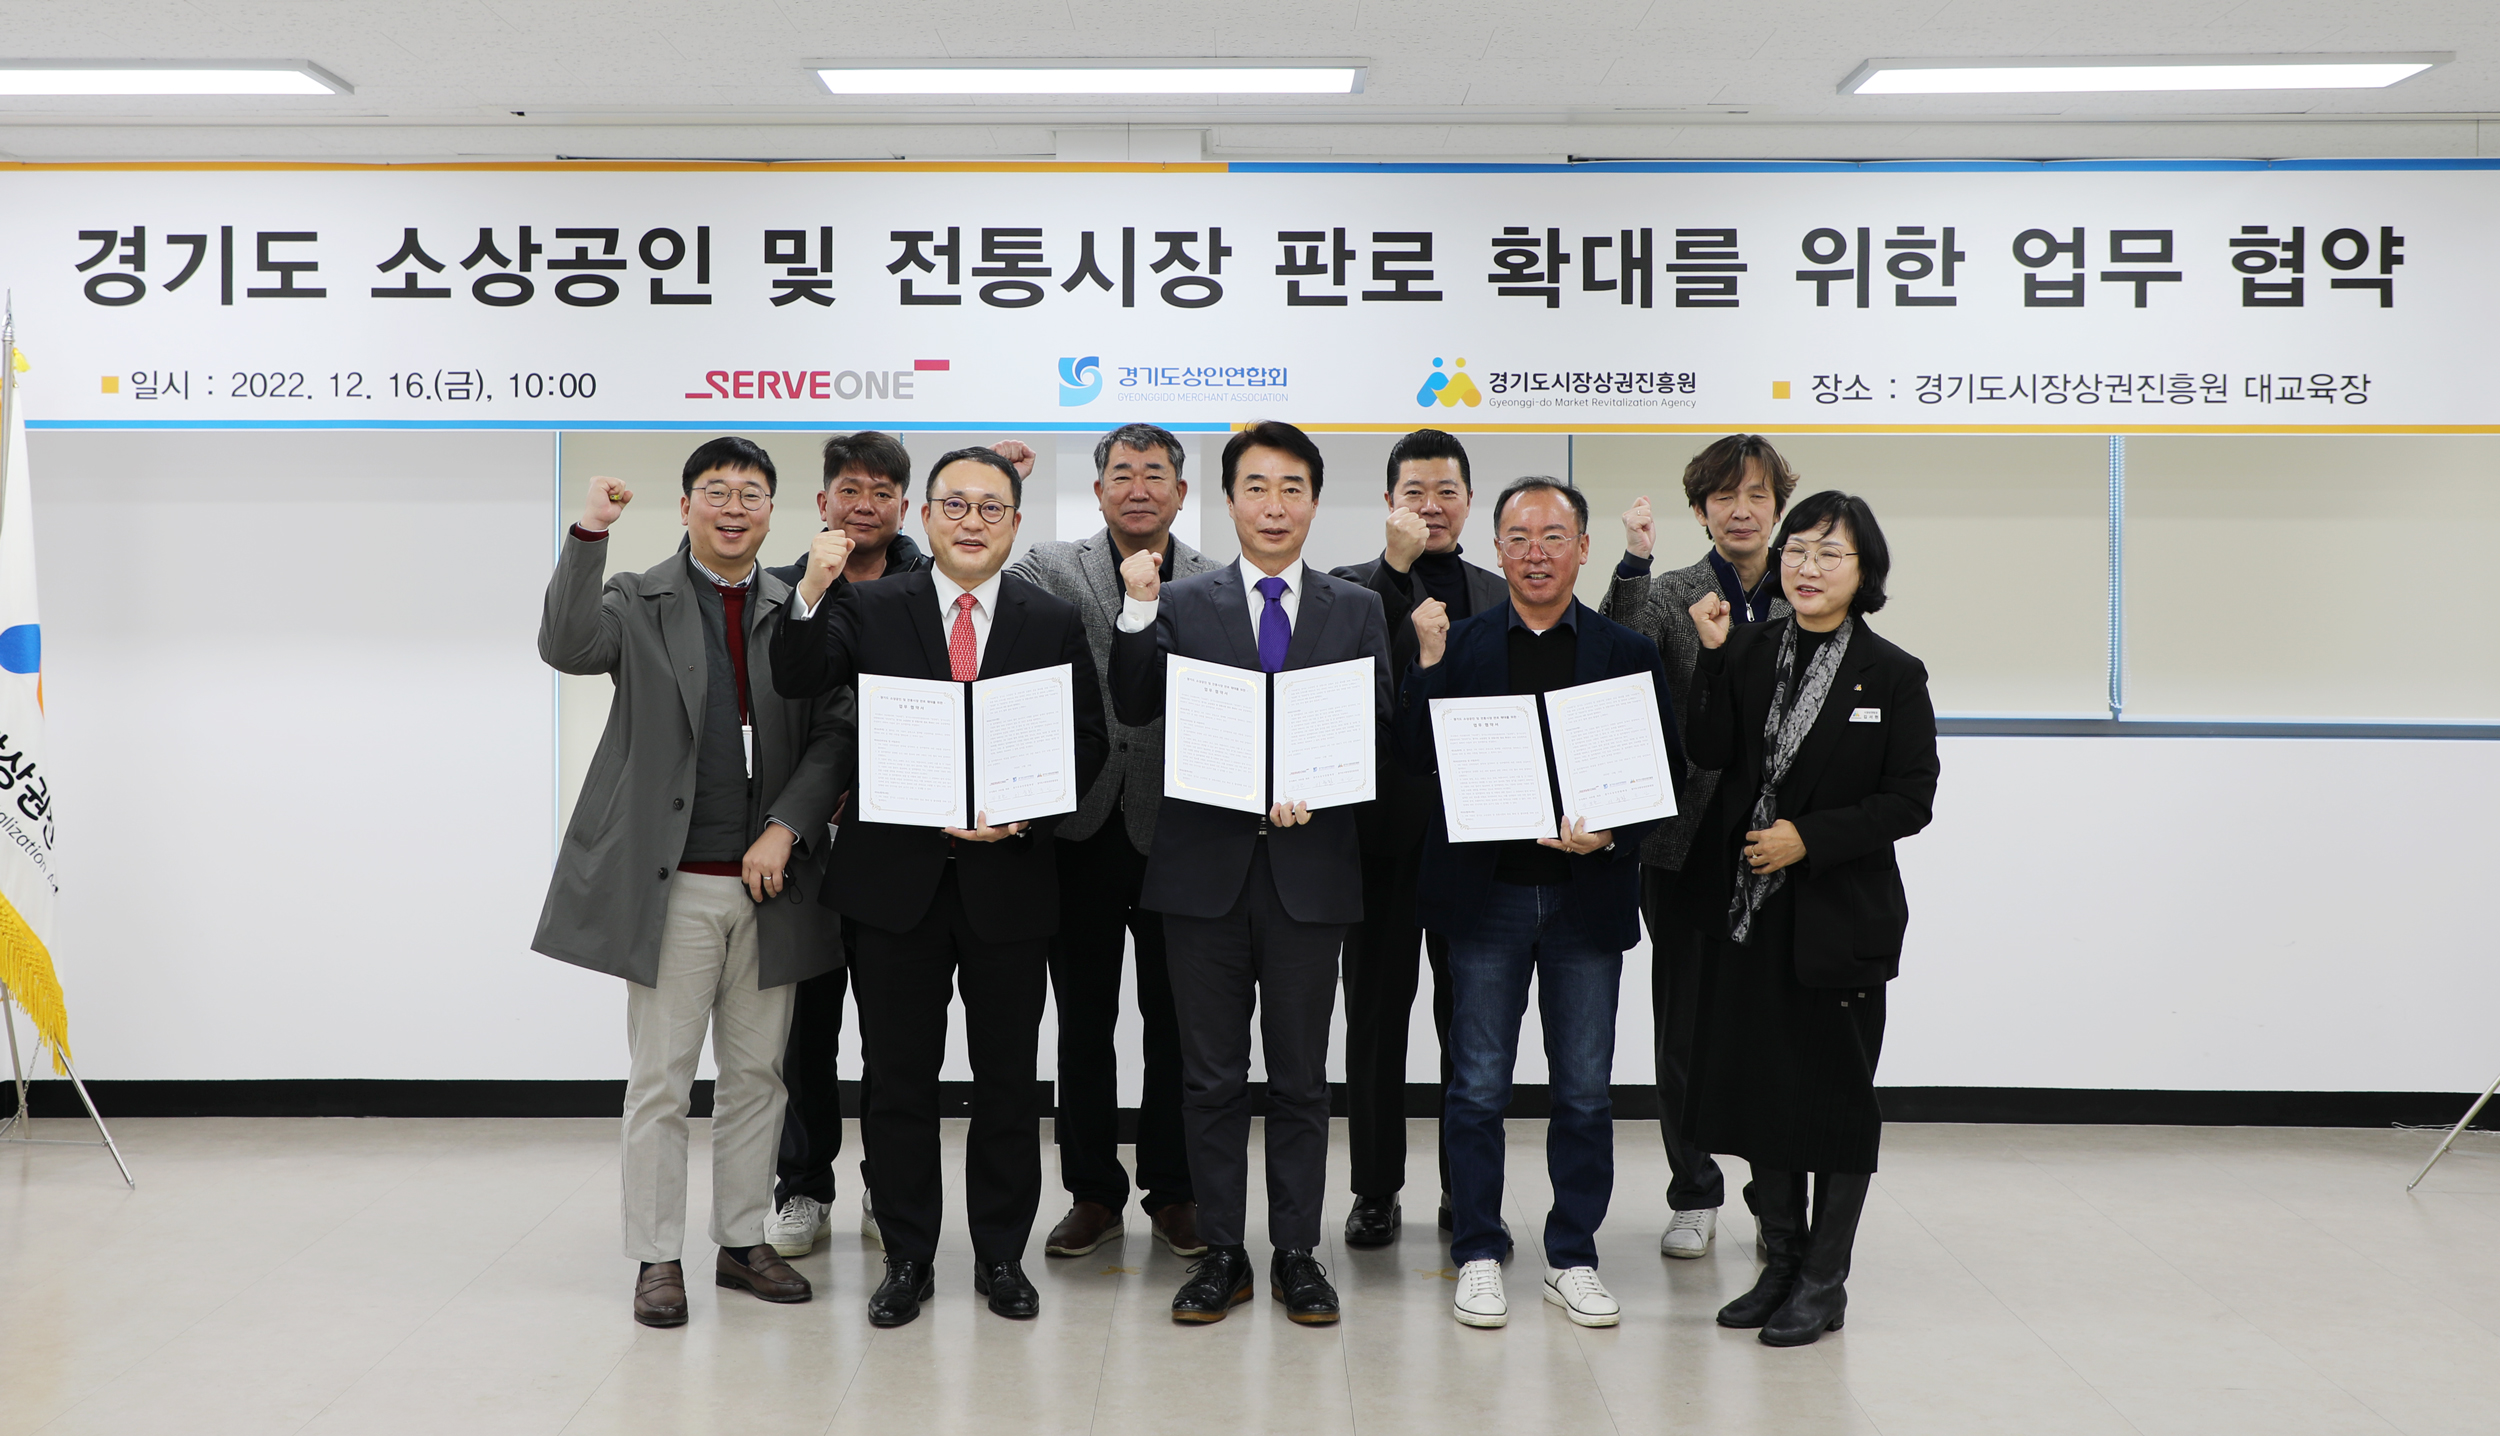 SERVEONE signed a distribution channel partnership agreement to support small business owners and traditional markets in Gyeonggi-do